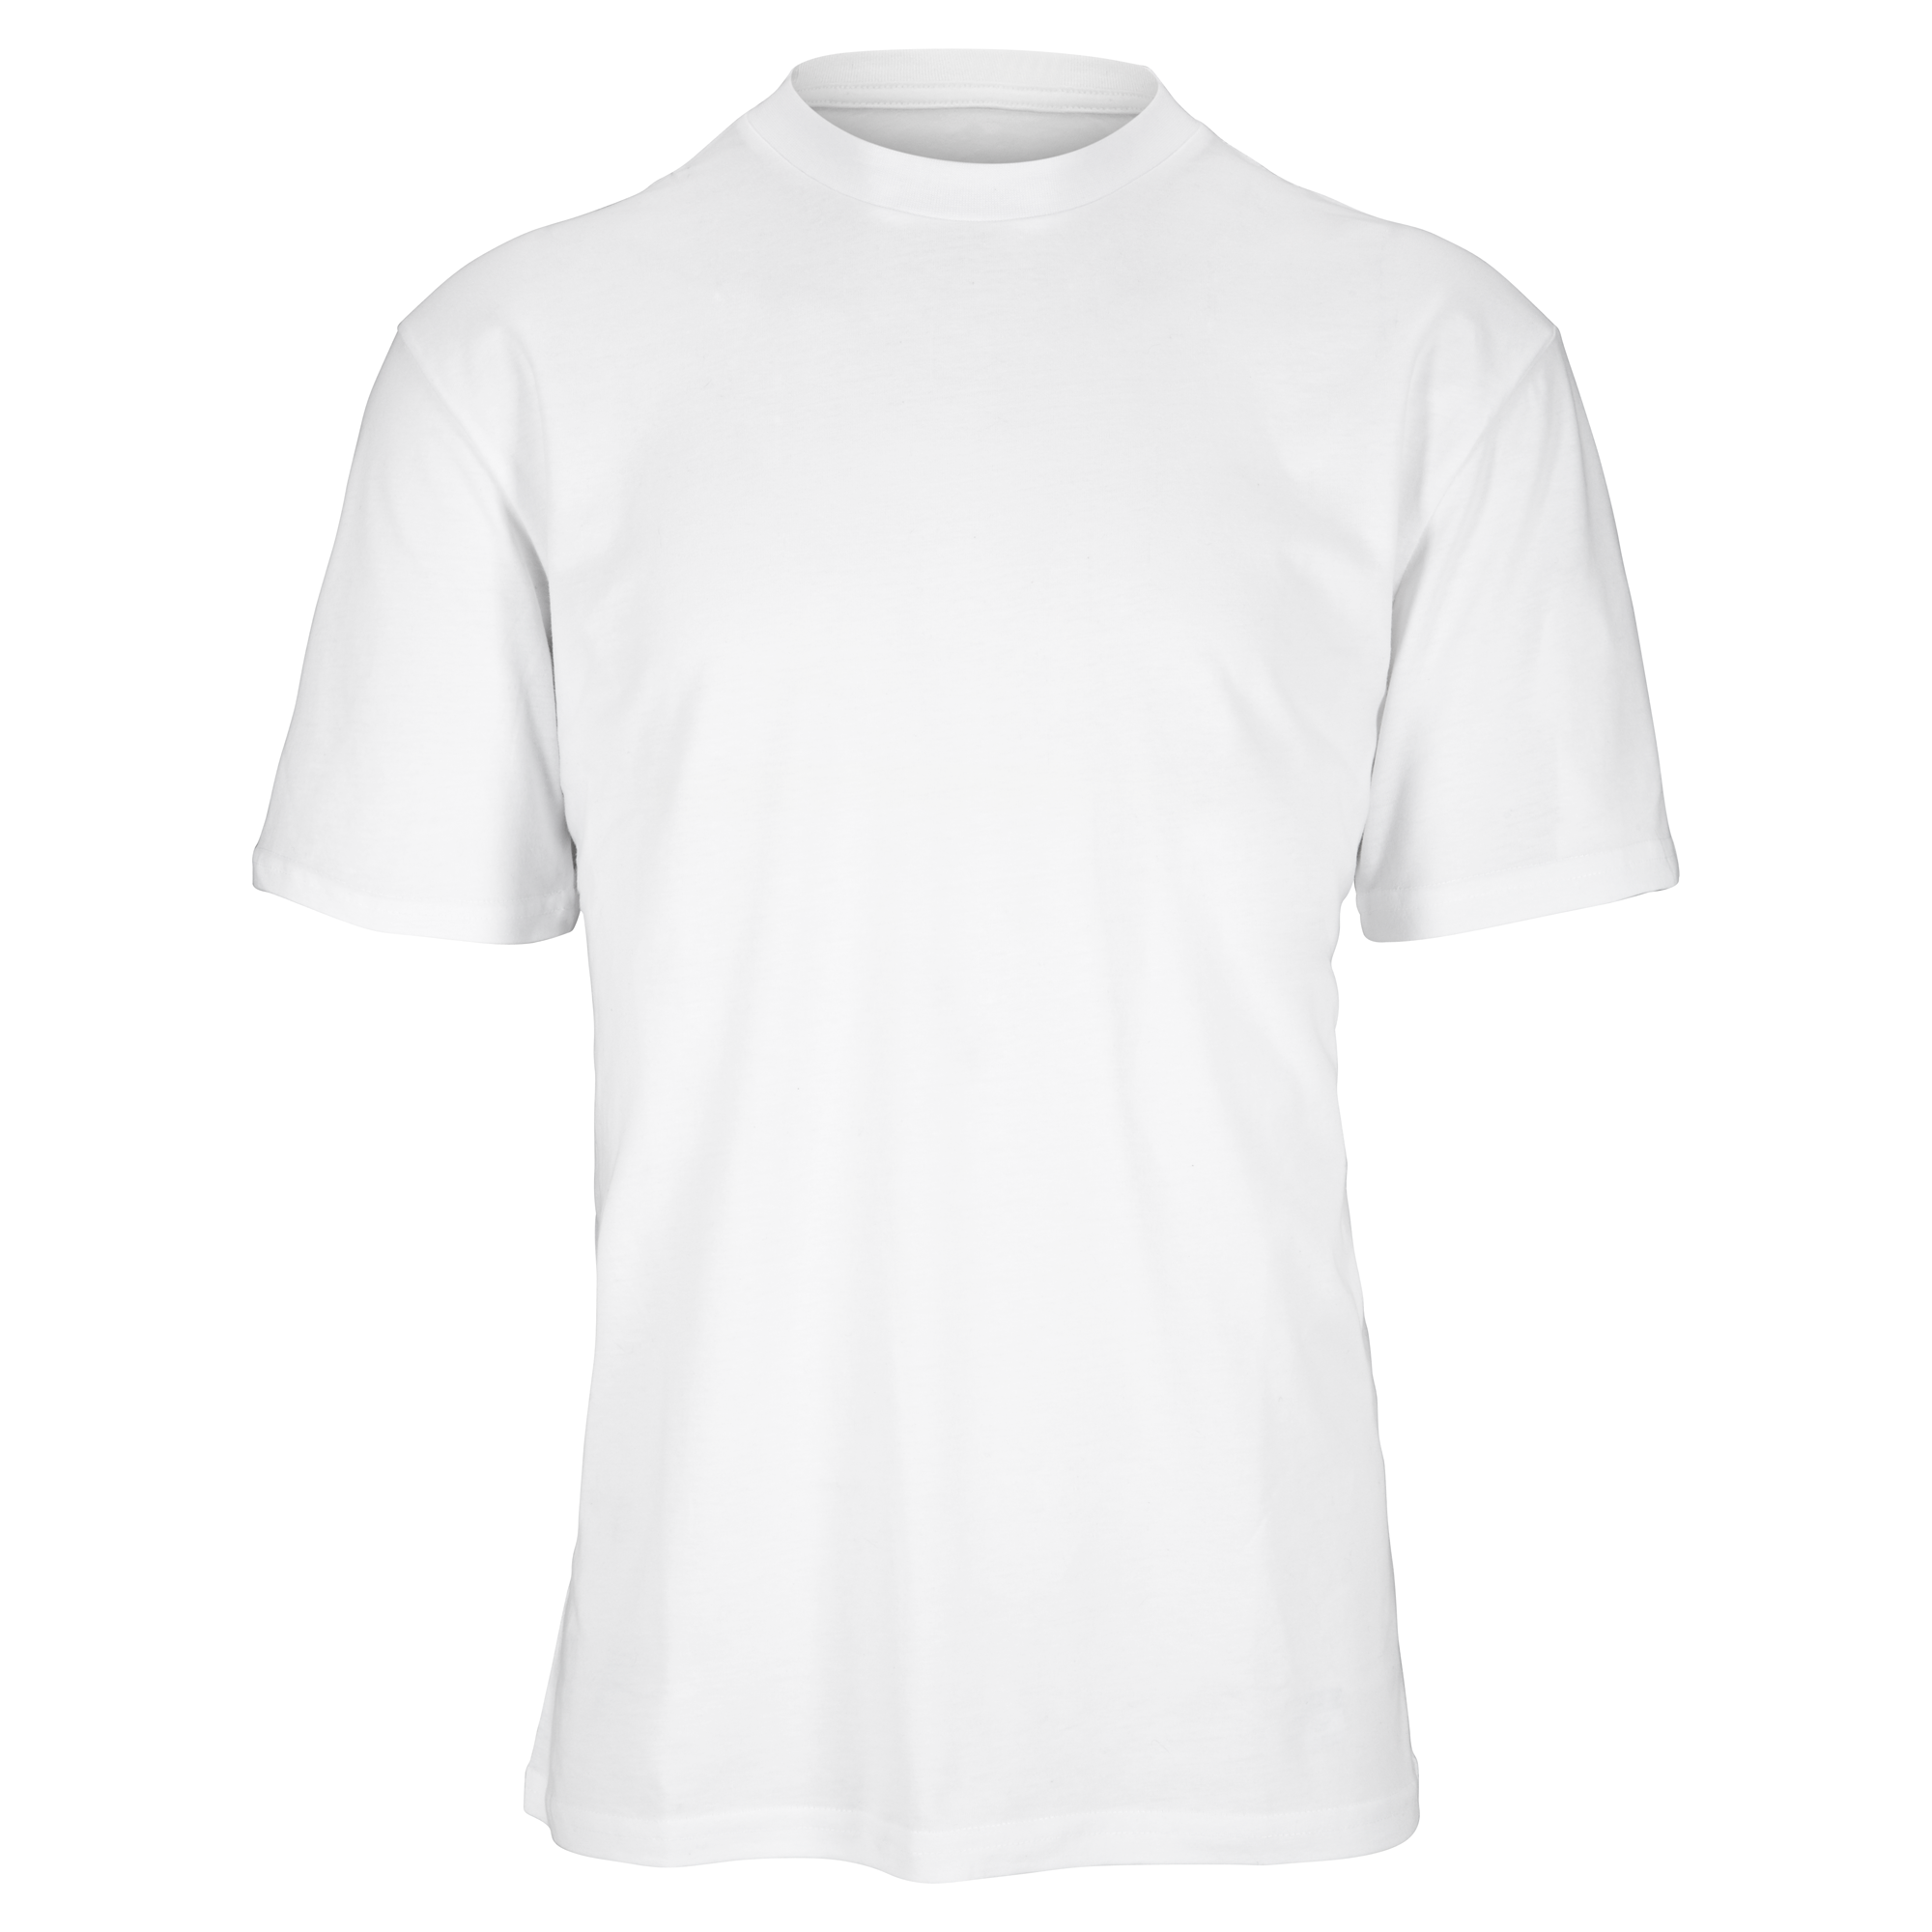 Herren-T-Shirt weiß 2er-Pack M (48/50) + product picture